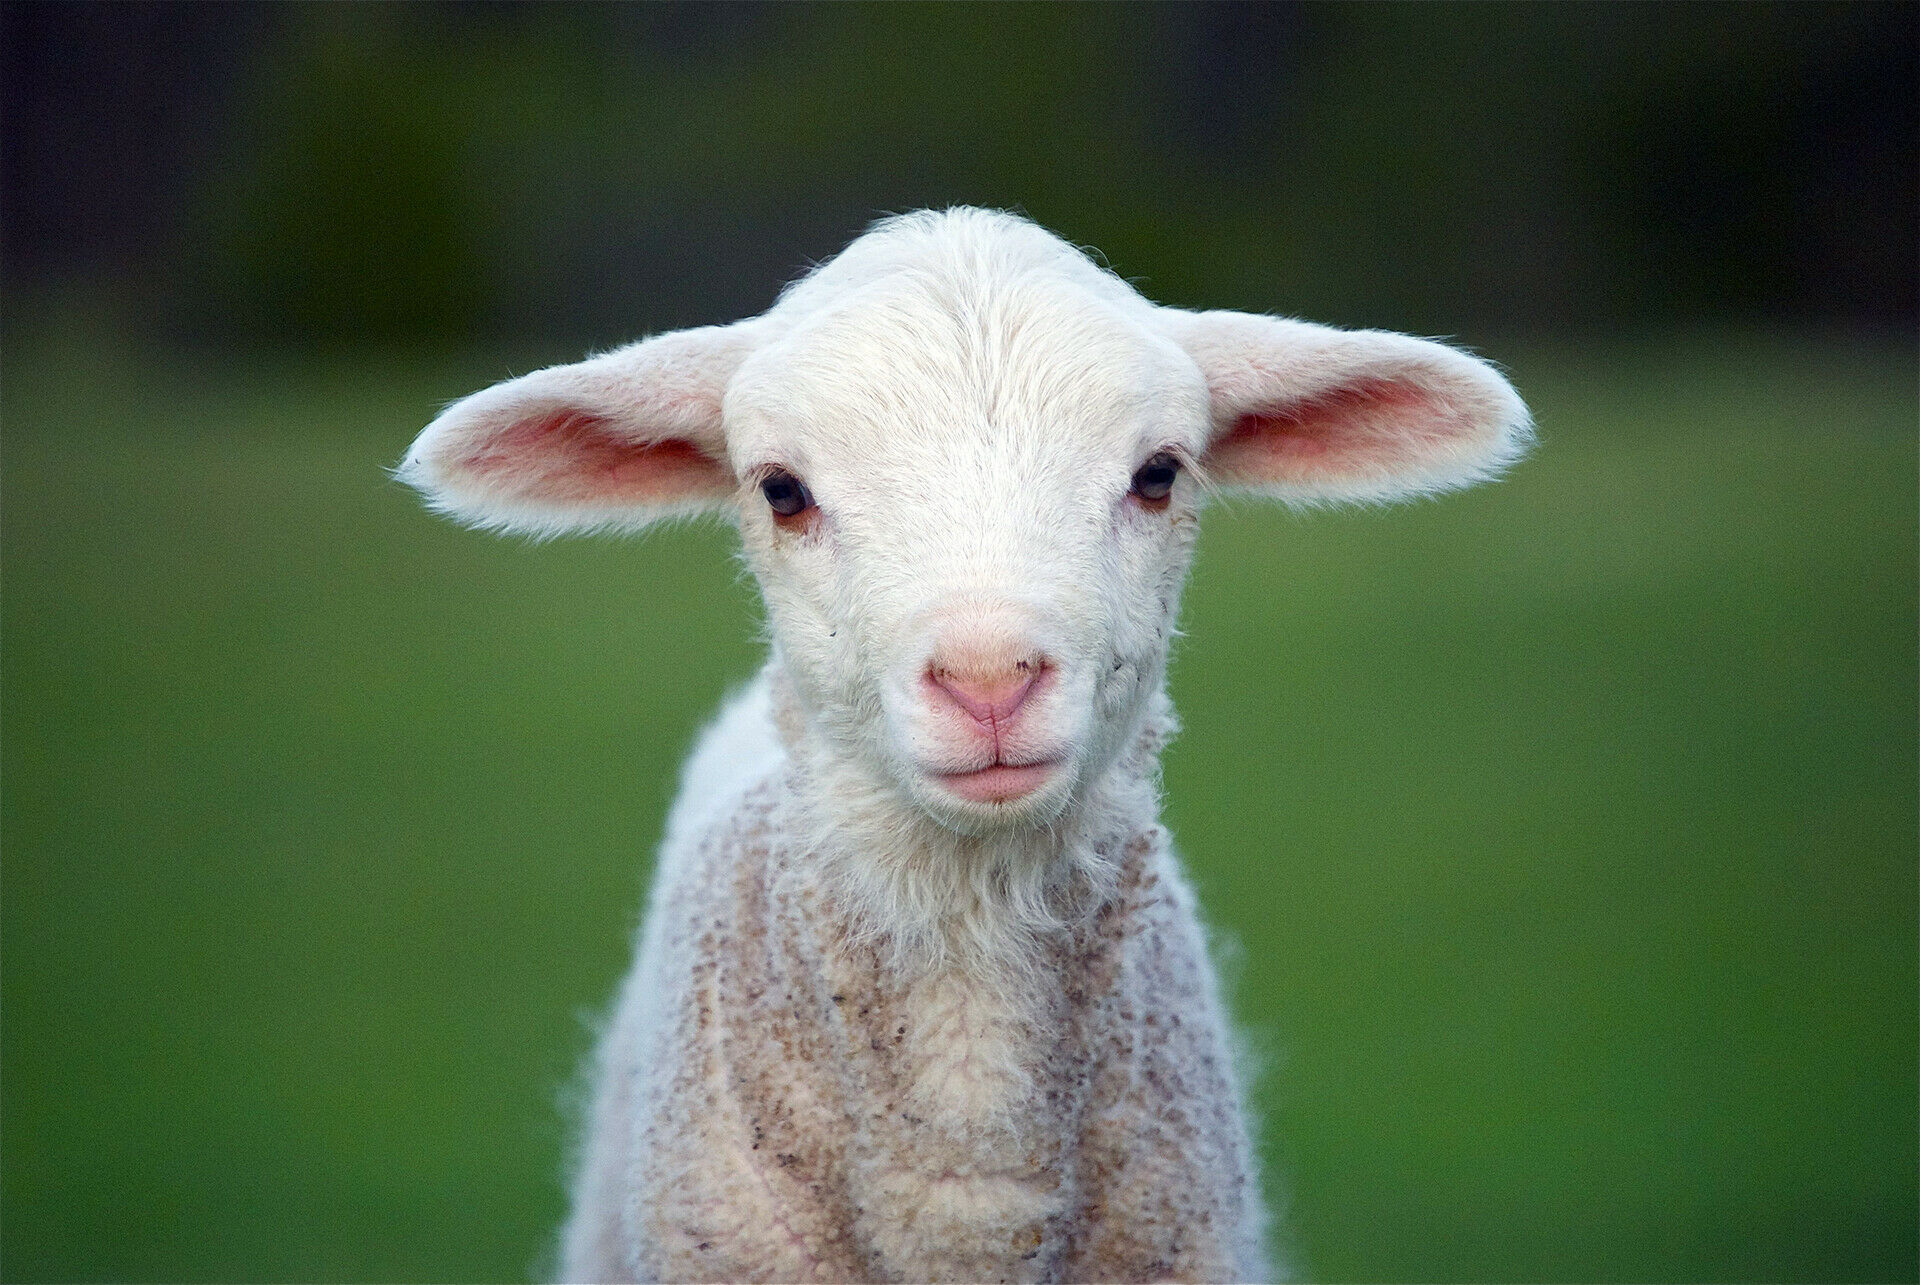 Would Ewe Rather Be a Lamb or a Lemming? - The Santa Barbara